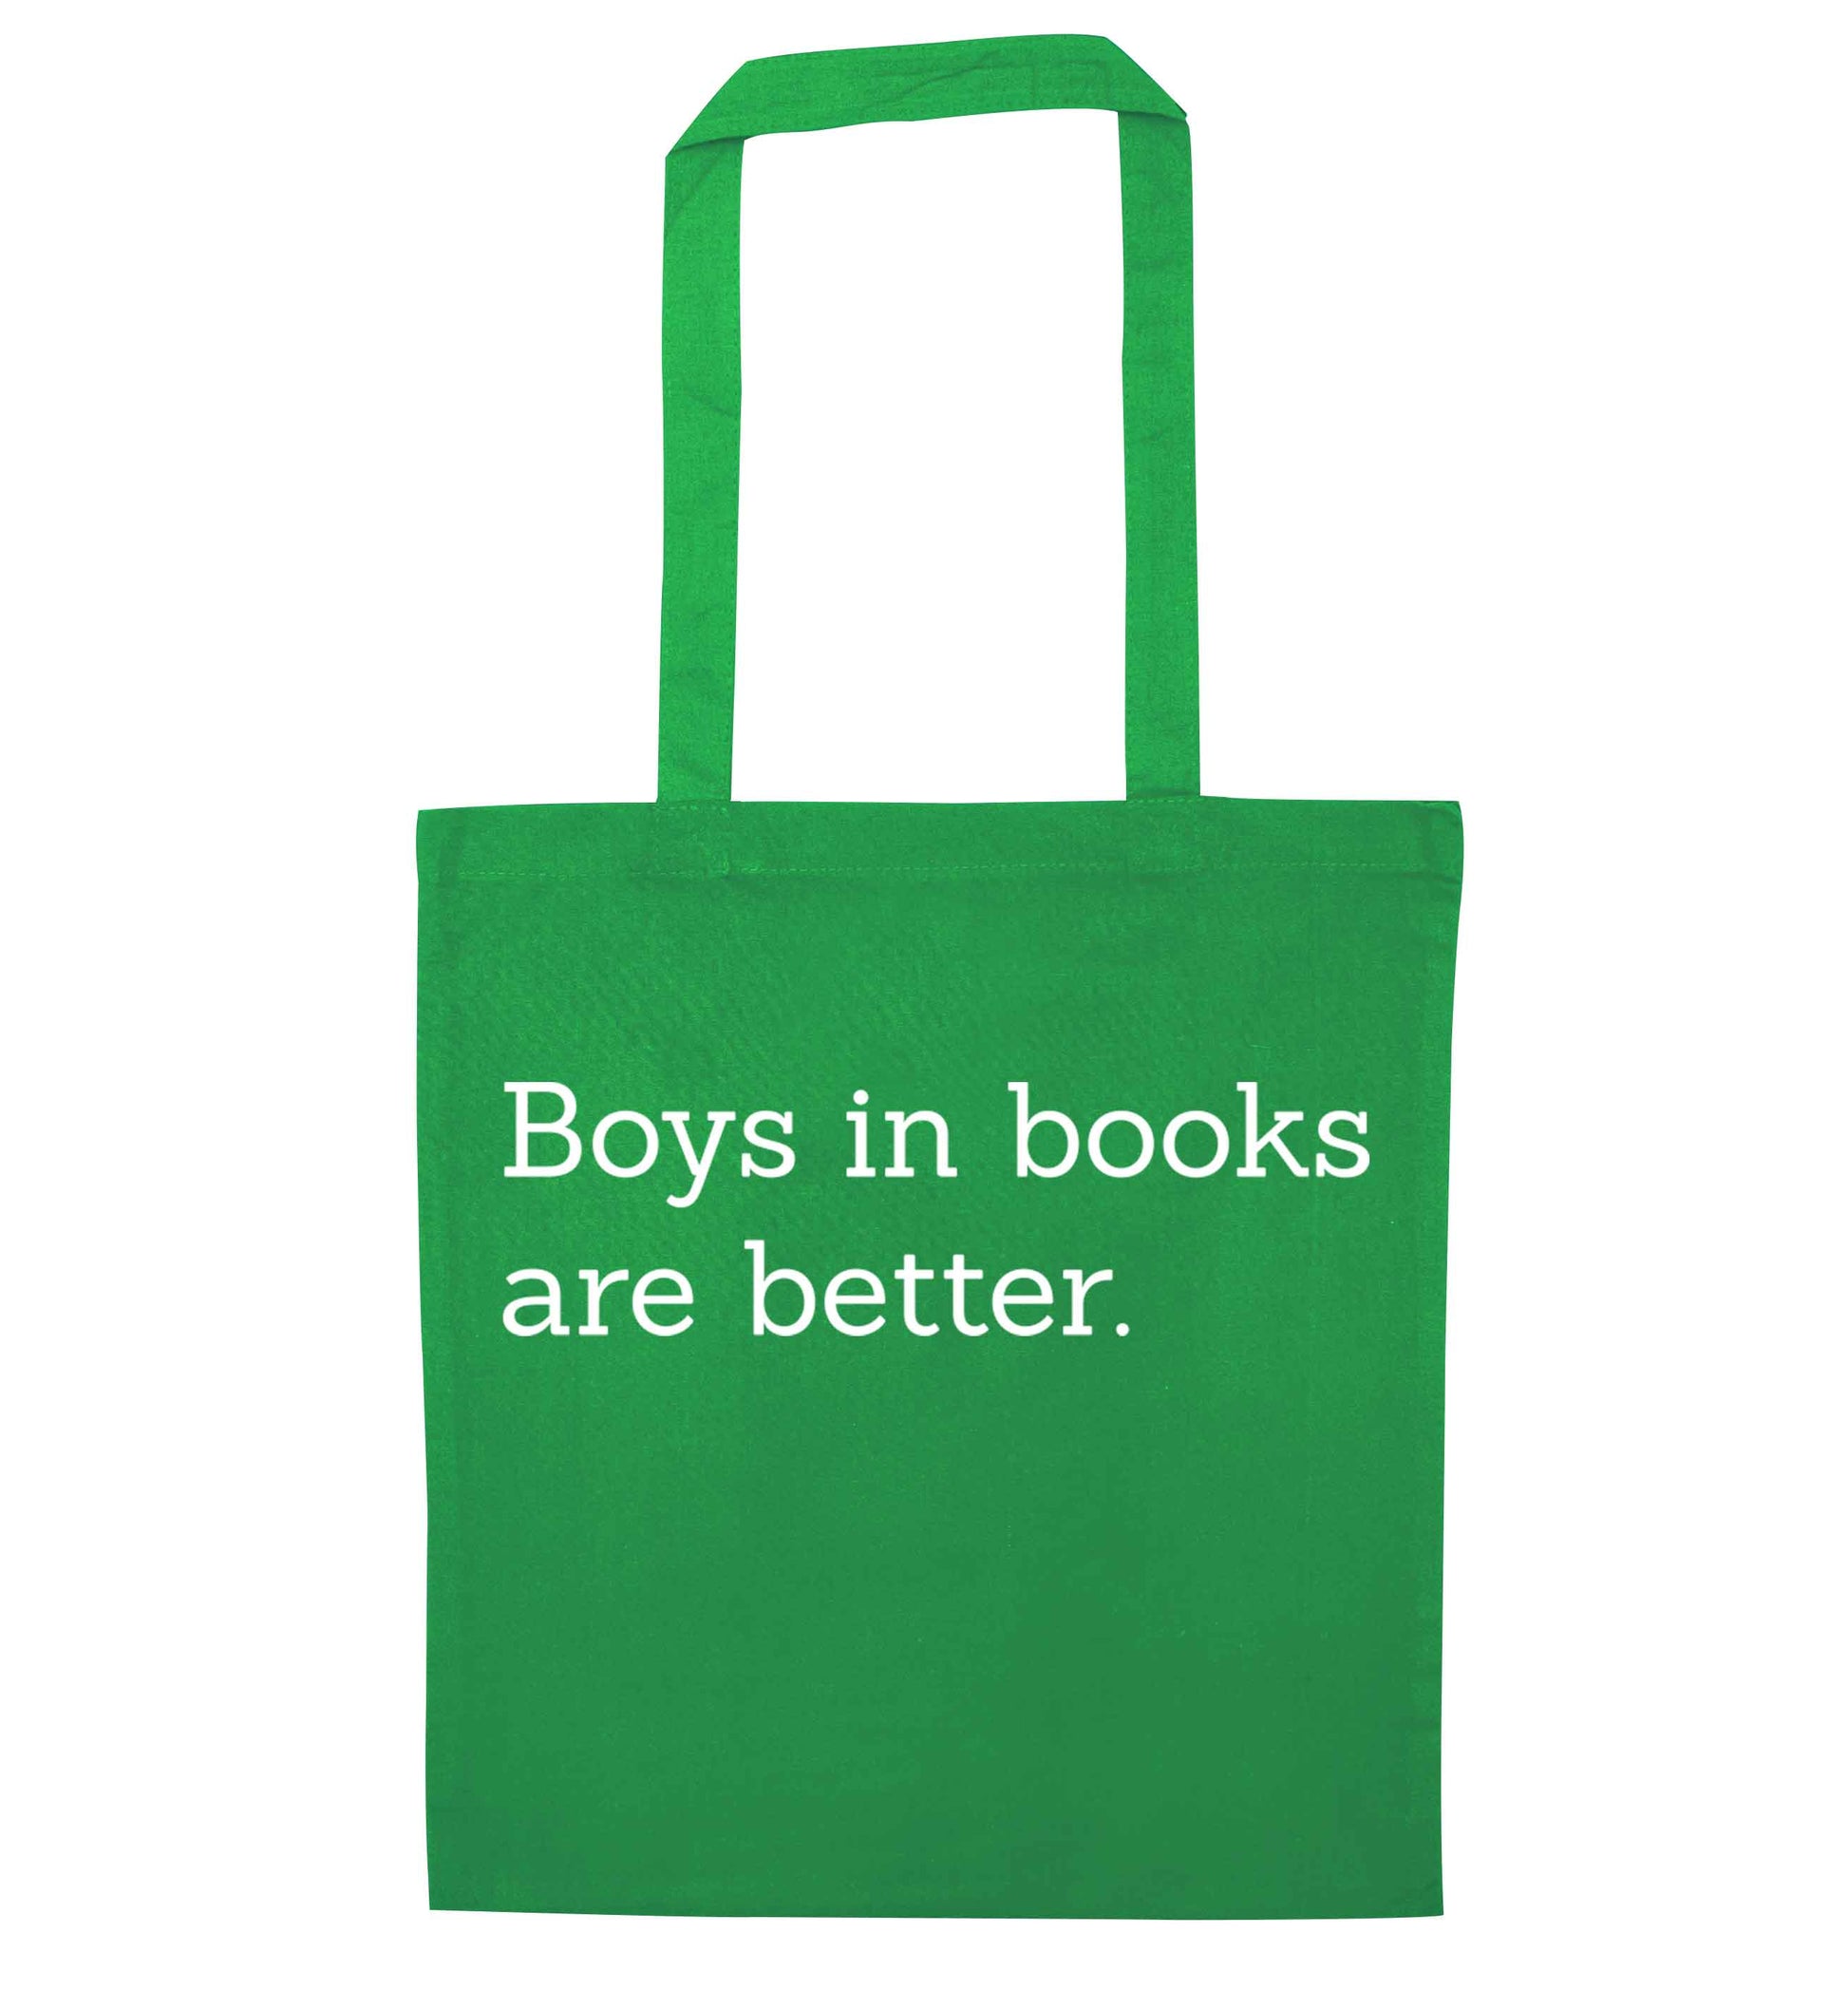 Boys in books are better green tote bag